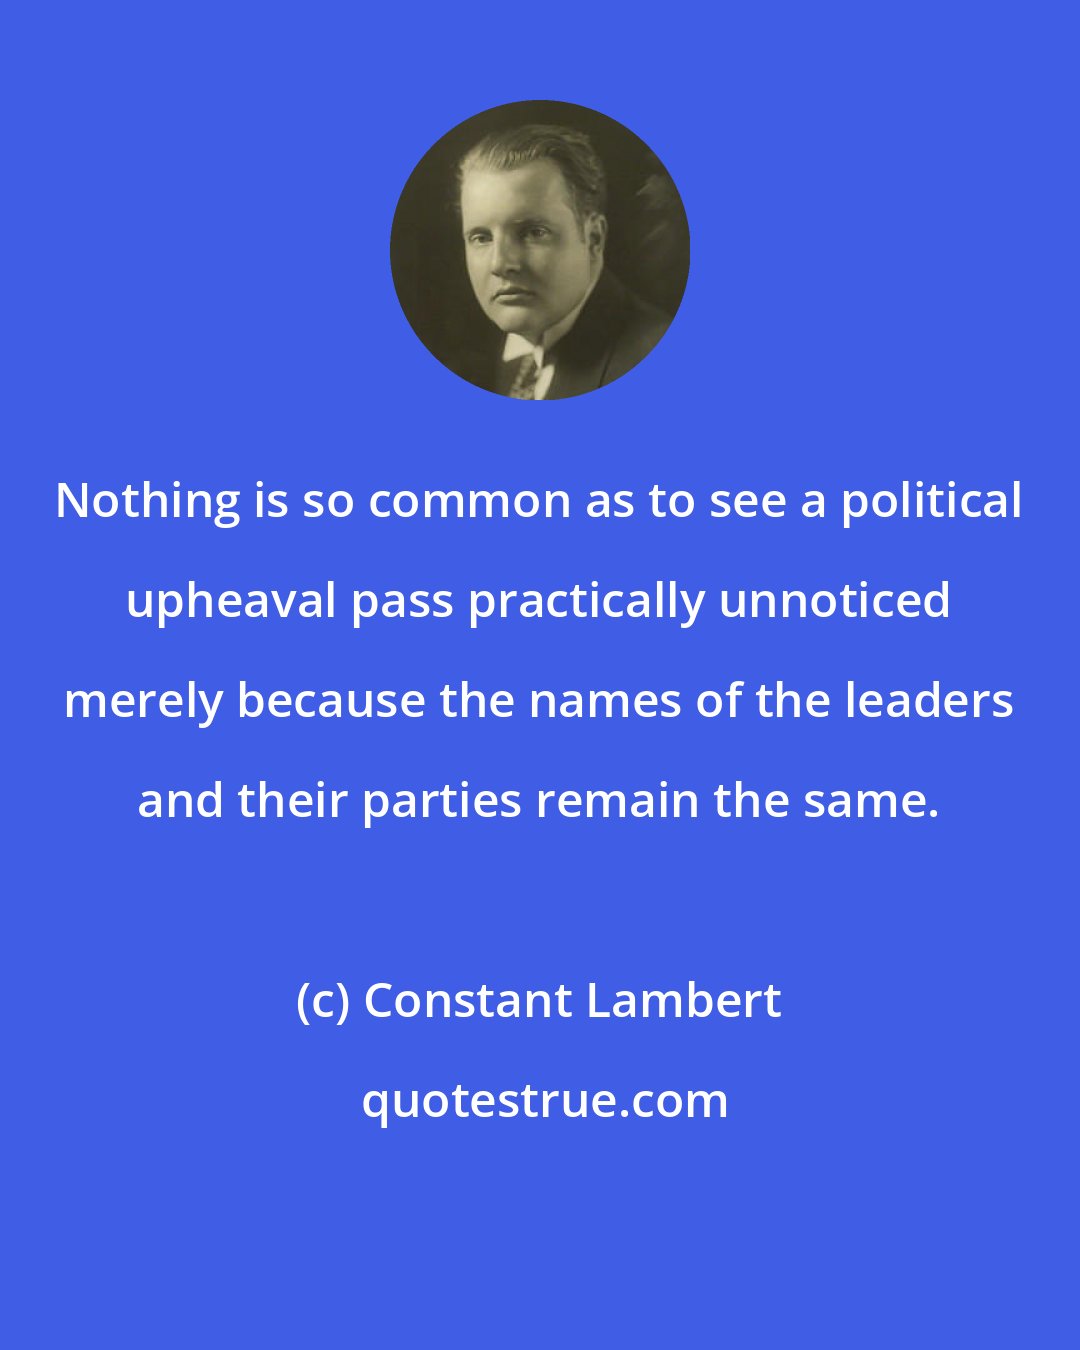 Constant Lambert: Nothing is so common as to see a political upheaval pass practically unnoticed merely because the names of the leaders and their parties remain the same.